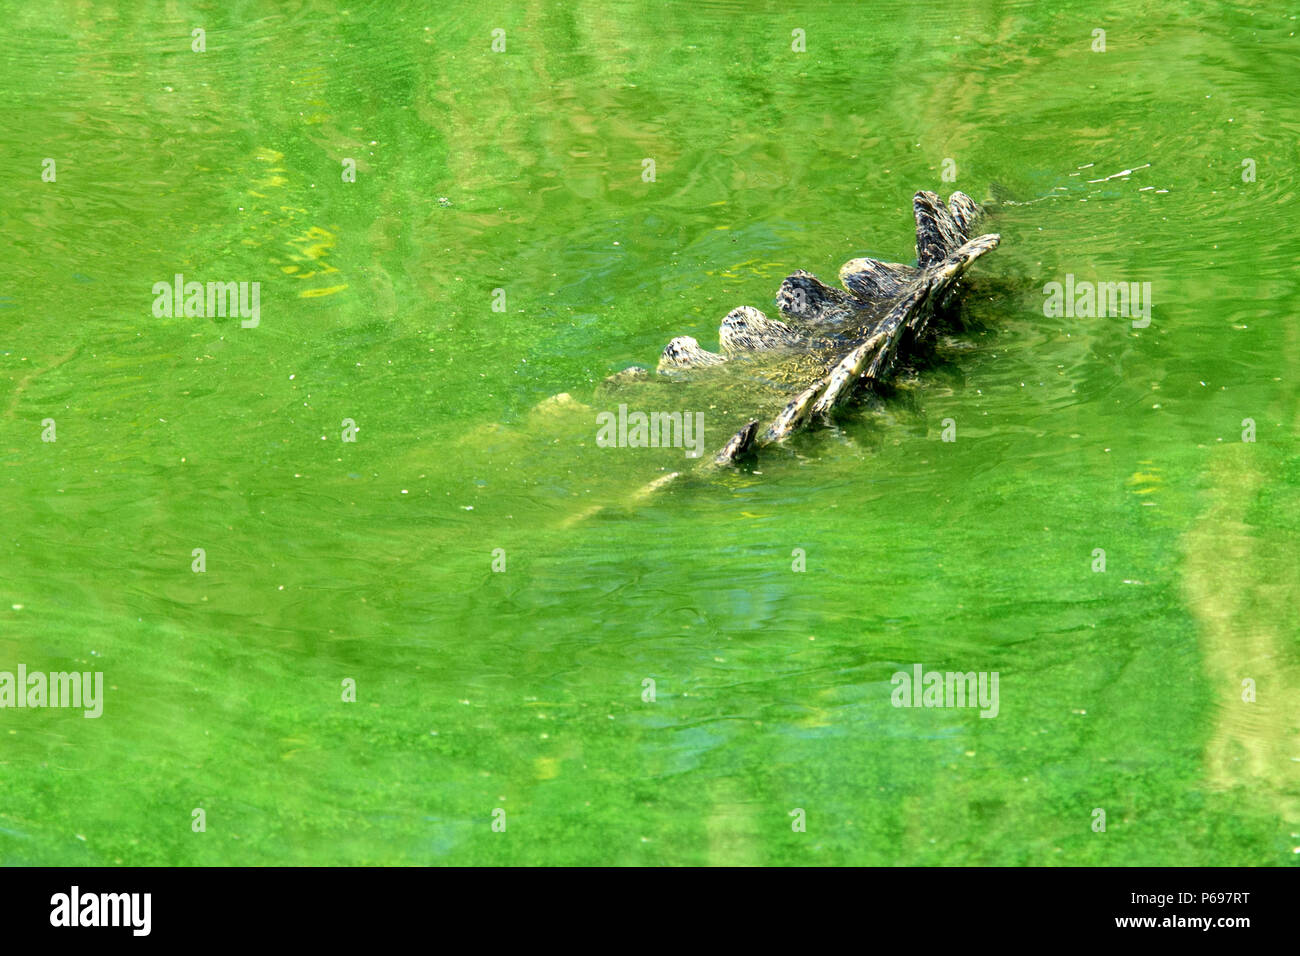 Nile Crocodile - Crocodylus Niloticus - showing tail in water with green algae. Stock Photo